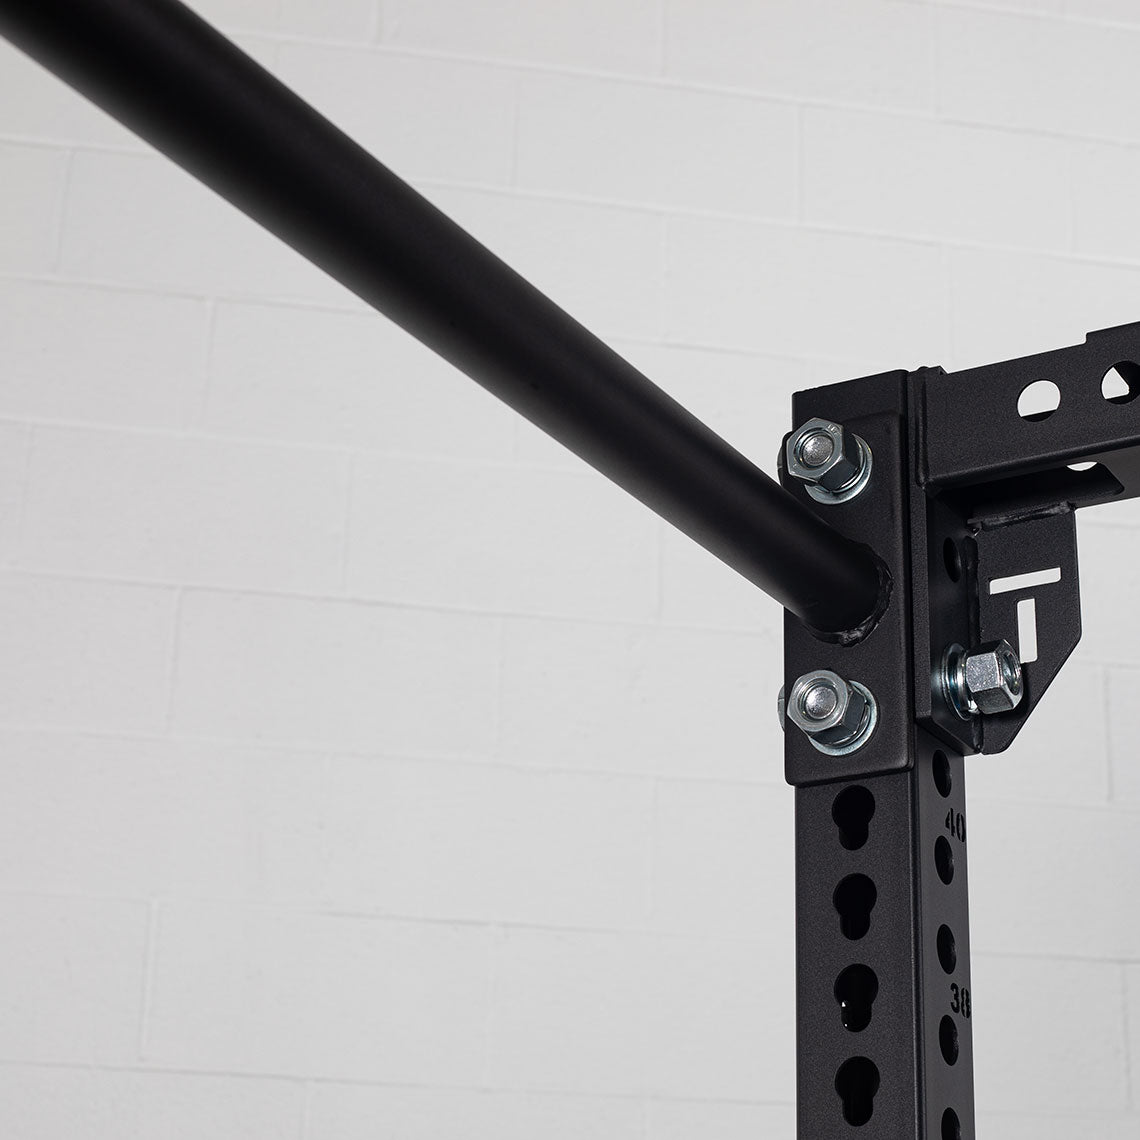 TITAN Series 2" Single Fat Pull-Up Bar - 1-inch Hardware for maximum stability and durability